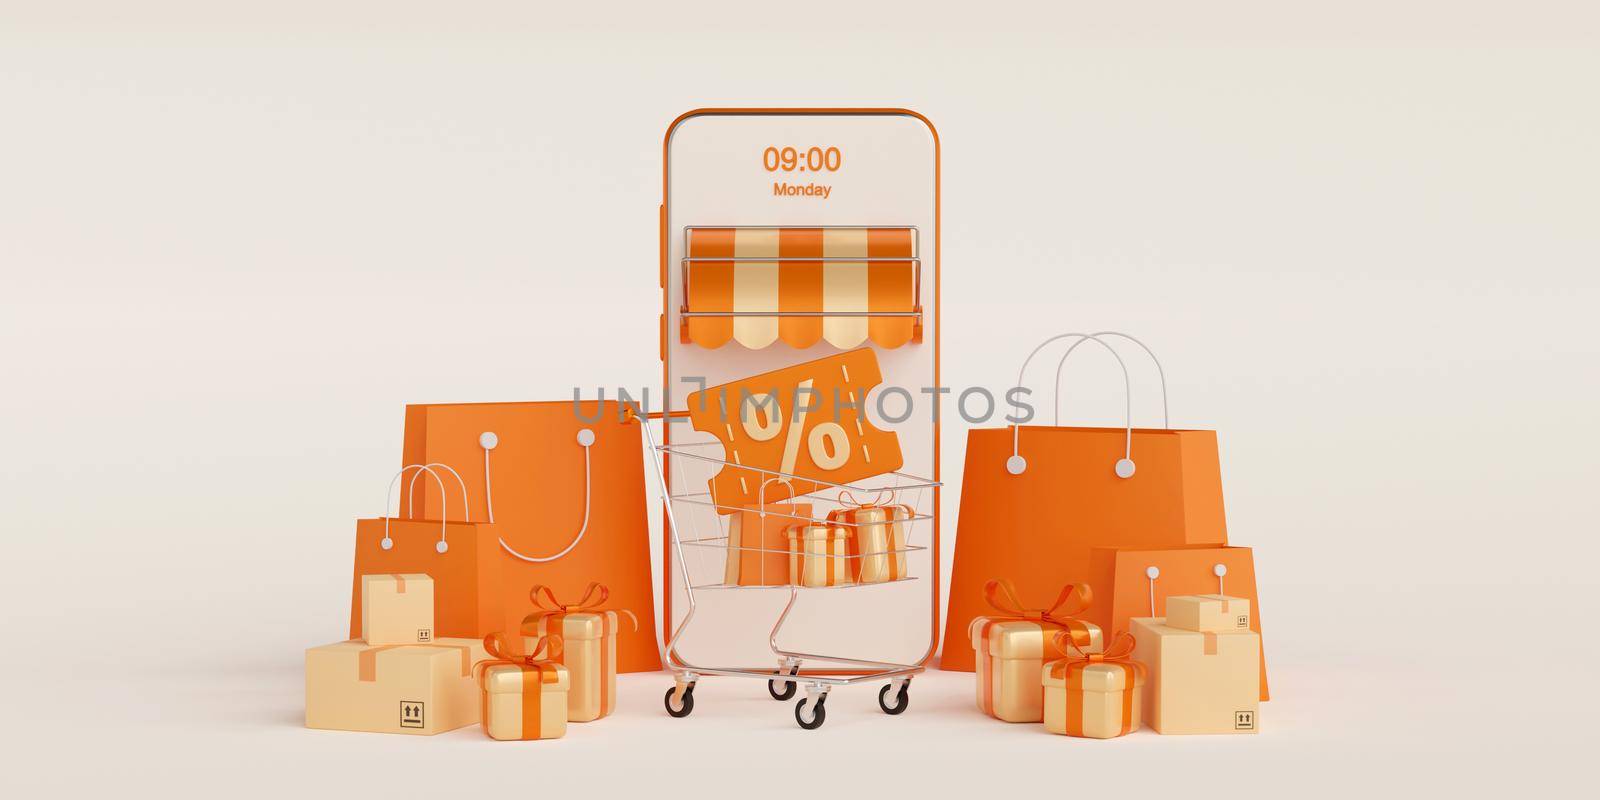 Discount code with shopping online application on mobile, 3d illustration by nutzchotwarut